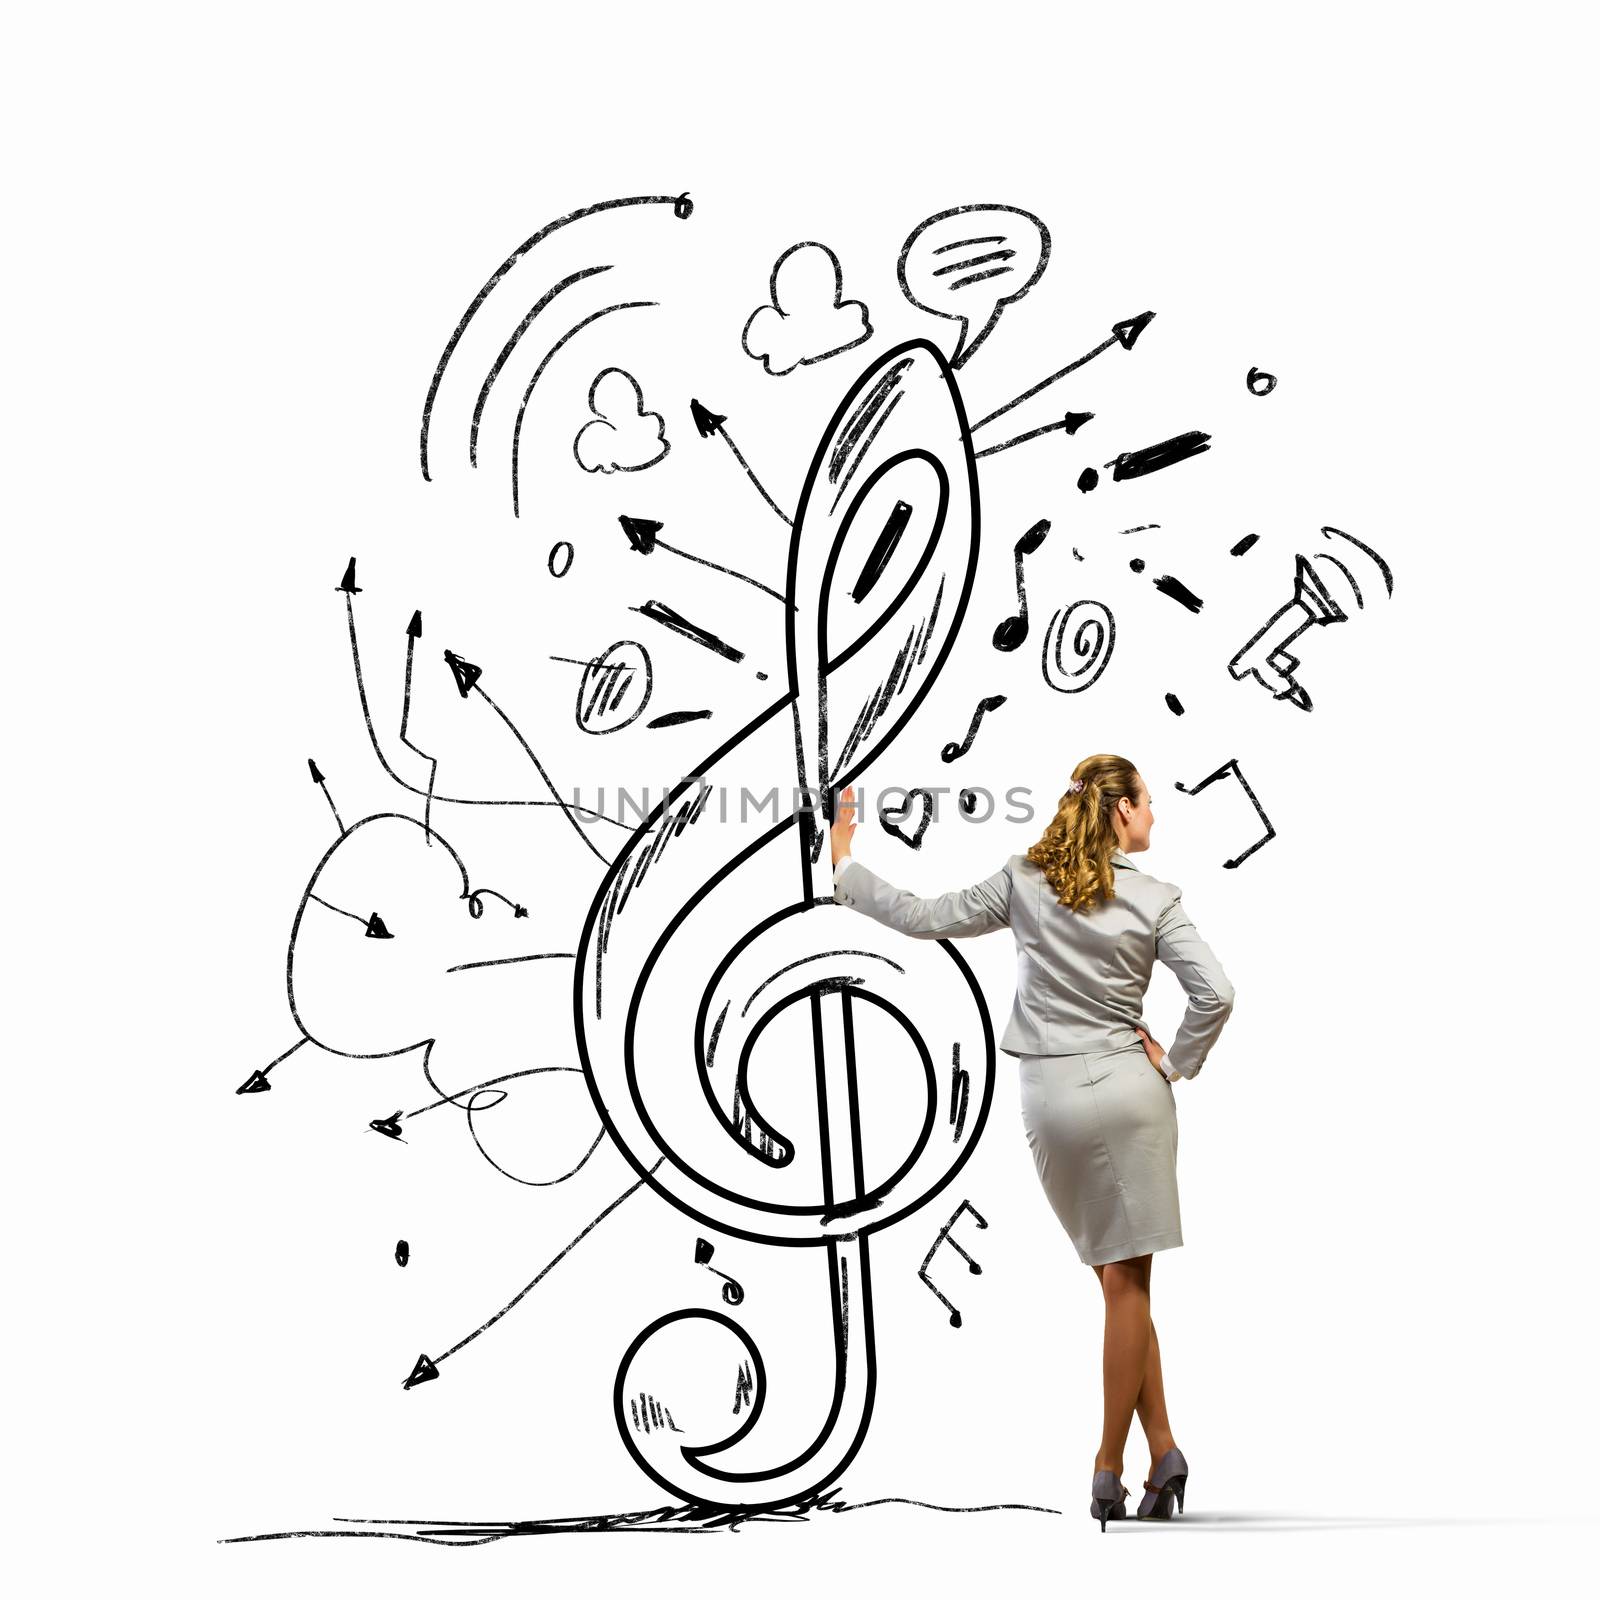 Image of woman standing with back leaning on clef